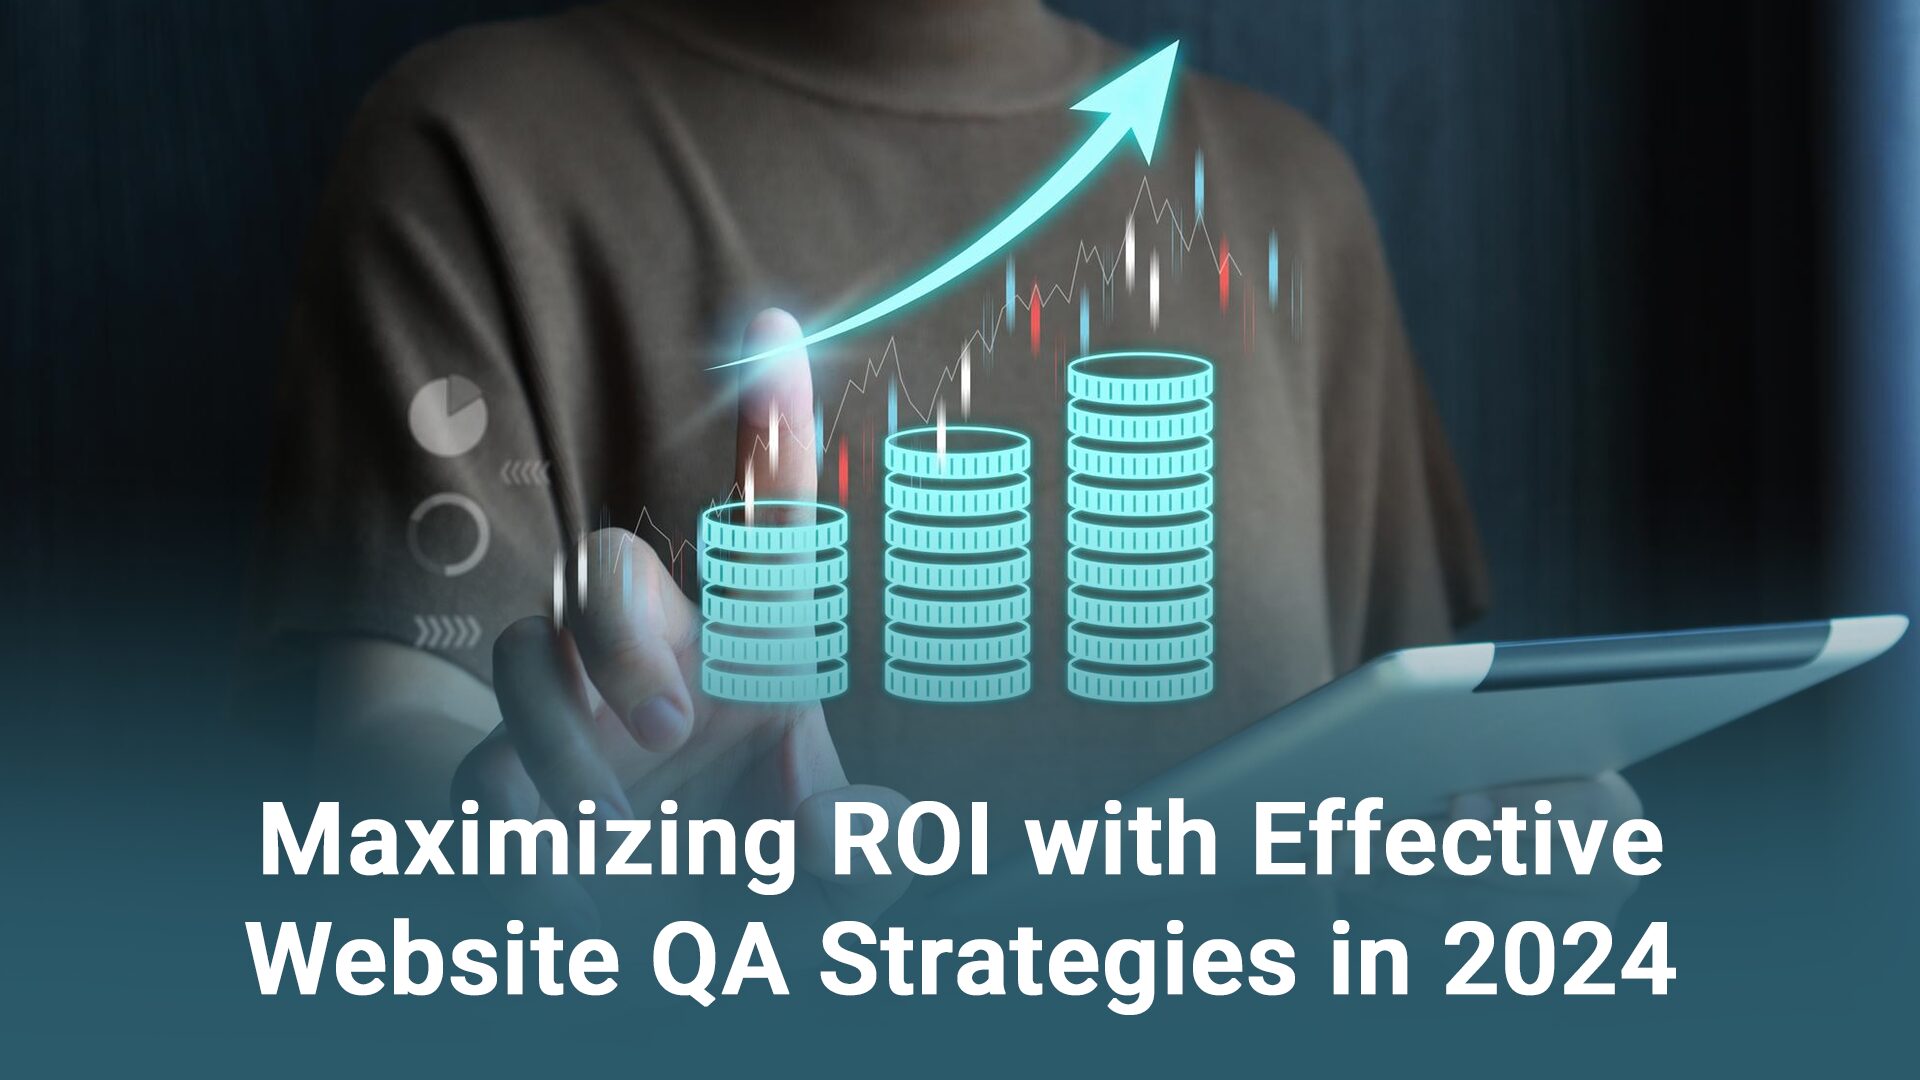 Maximizing ROI with Effective Website QA Strategies in 2024